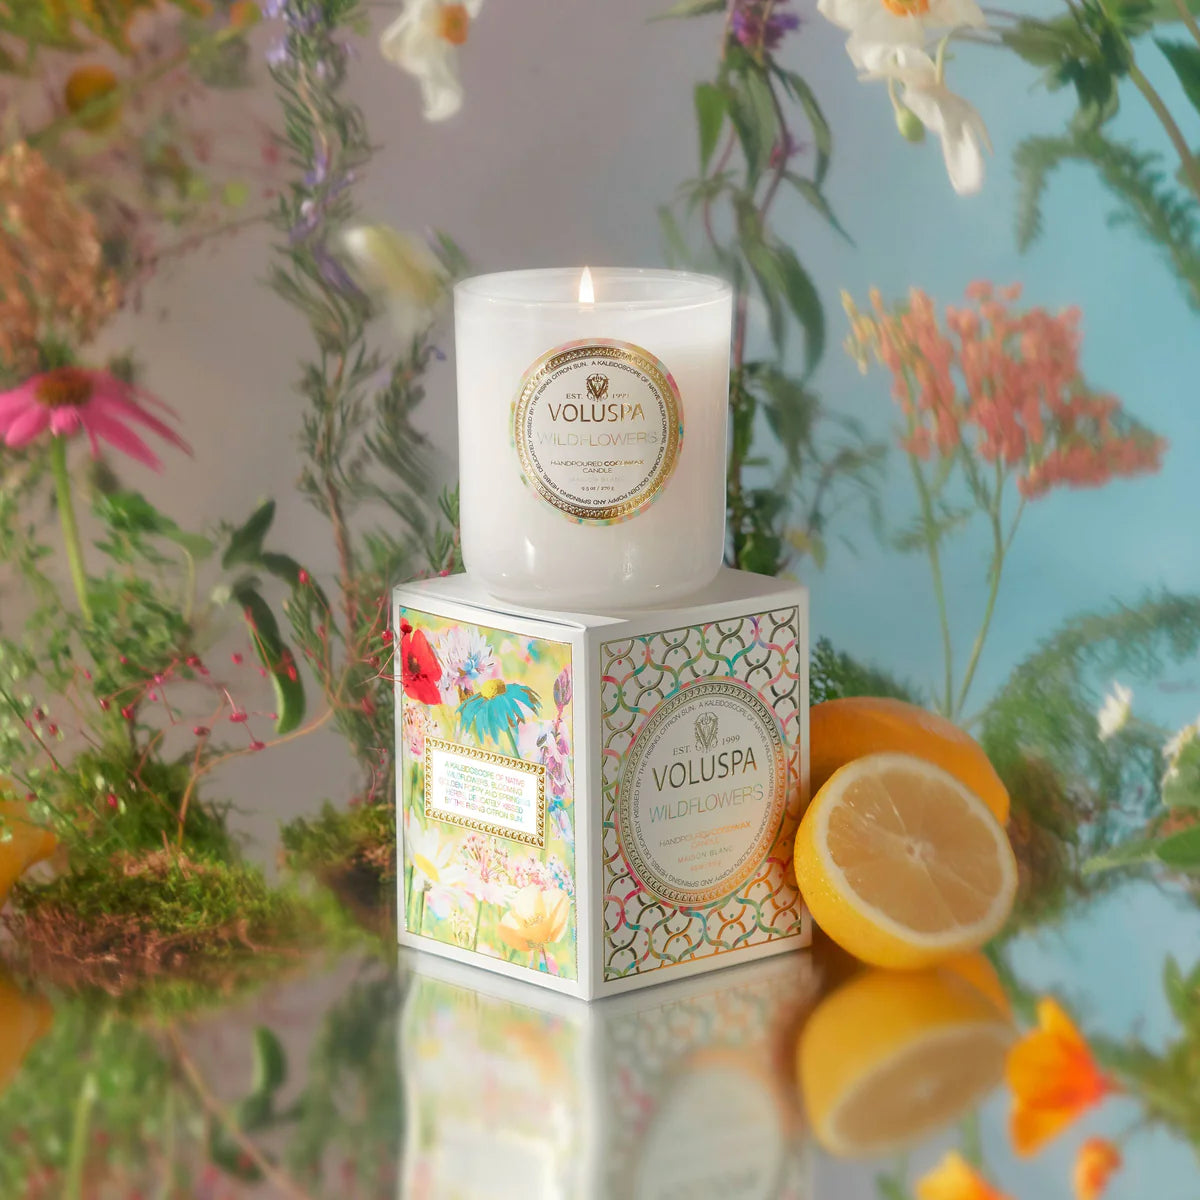 Voluspa - Classic Candle - Wildflowers